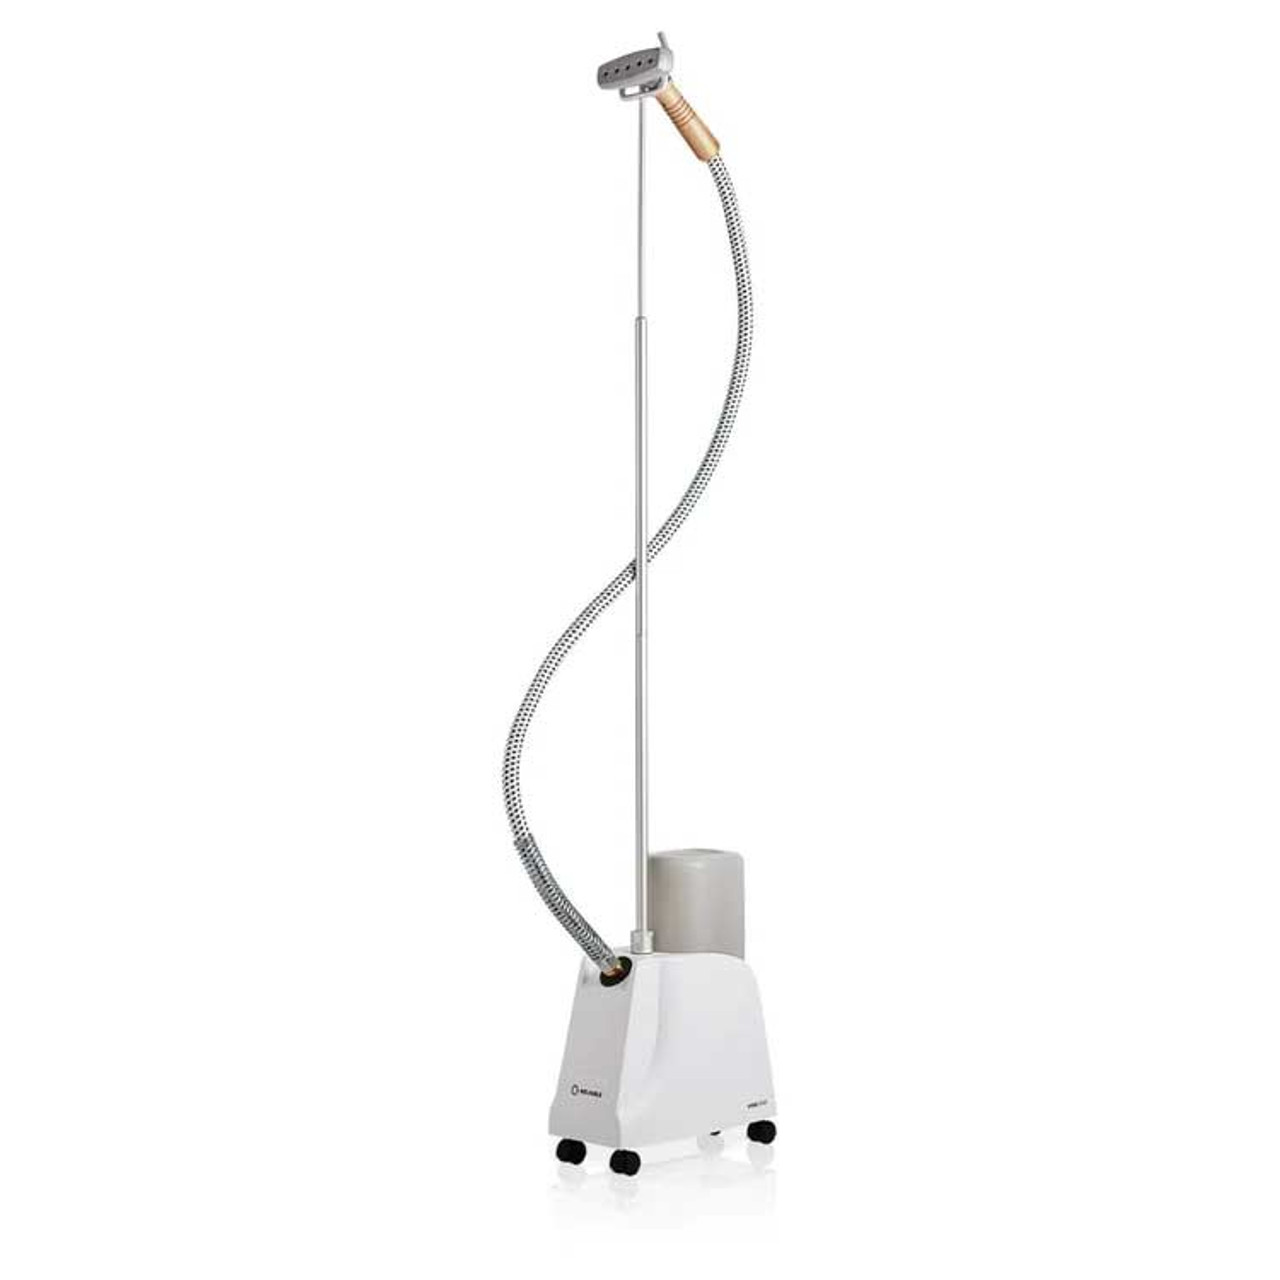 Vivio 170GC Pro Garment Steamer With Metal Head - Qualifies for Free Freight!